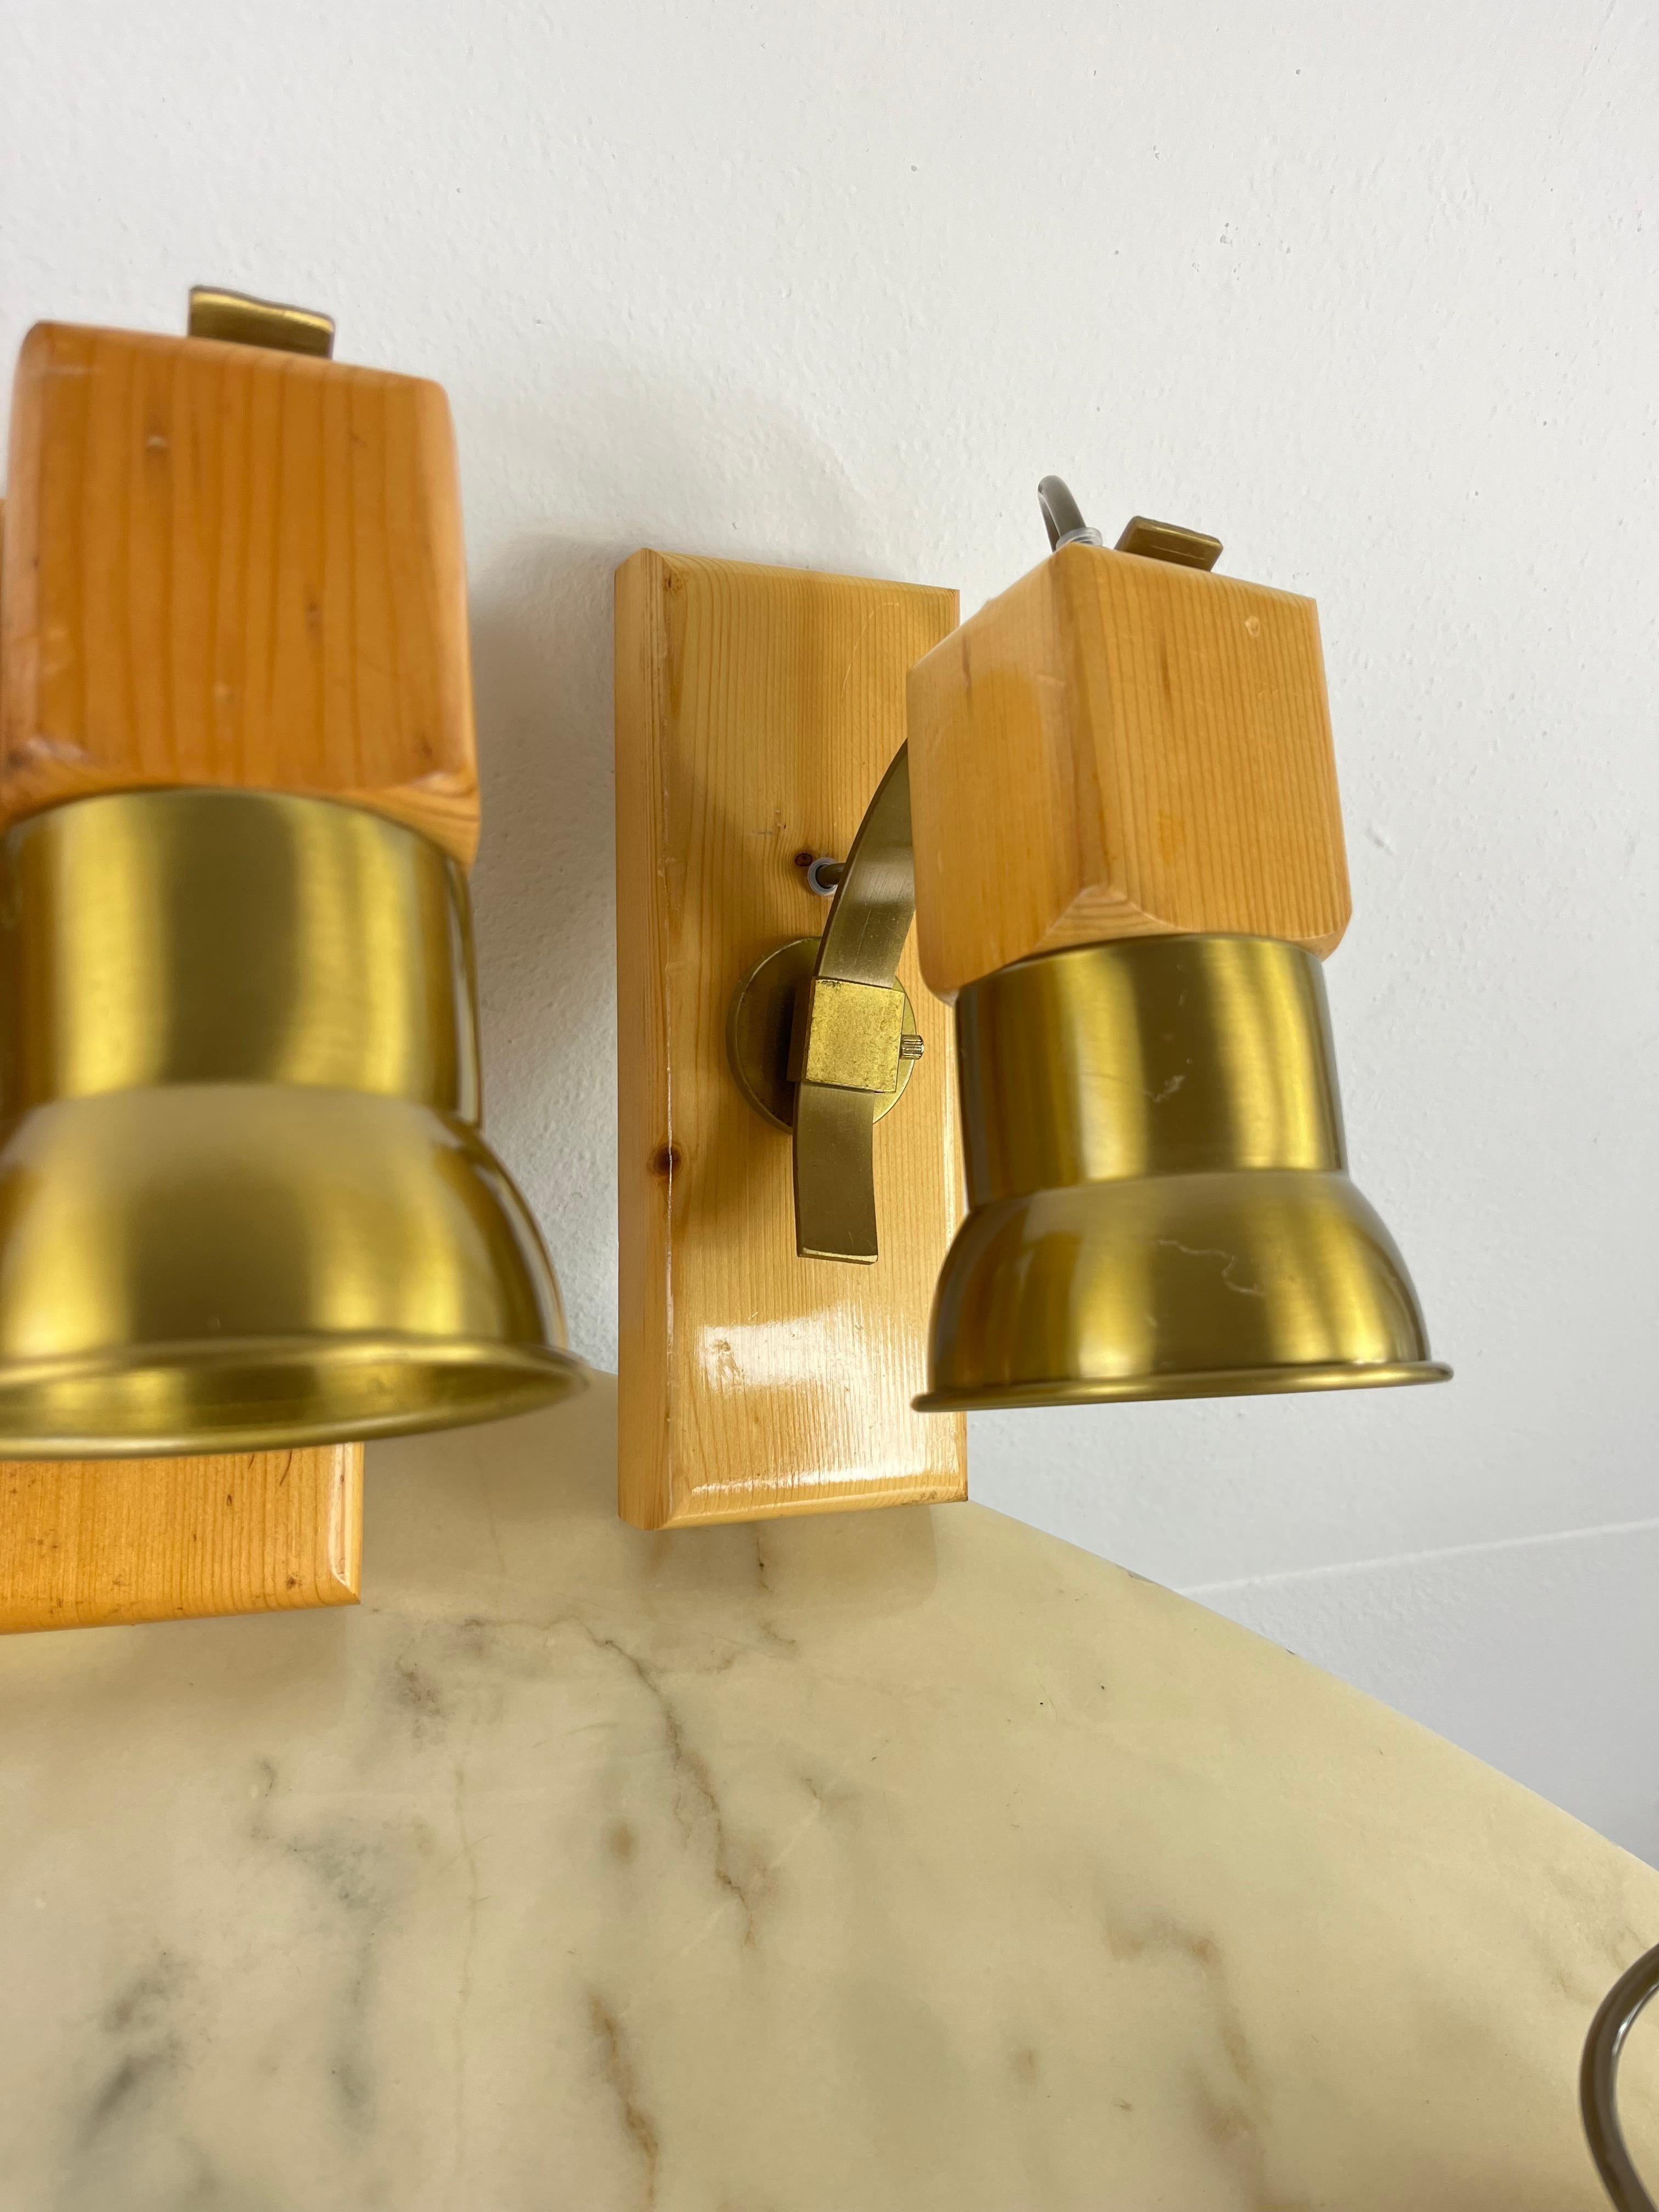 Set of 7 mid-century wood and brass wall lamps, Italian design 1960s
Adjustable arm, E 27 lamps
Good condition, small signs of aging.

We guarantee adequate packaging and will ship via DHL, insuring the contents against any breakage or loss of the